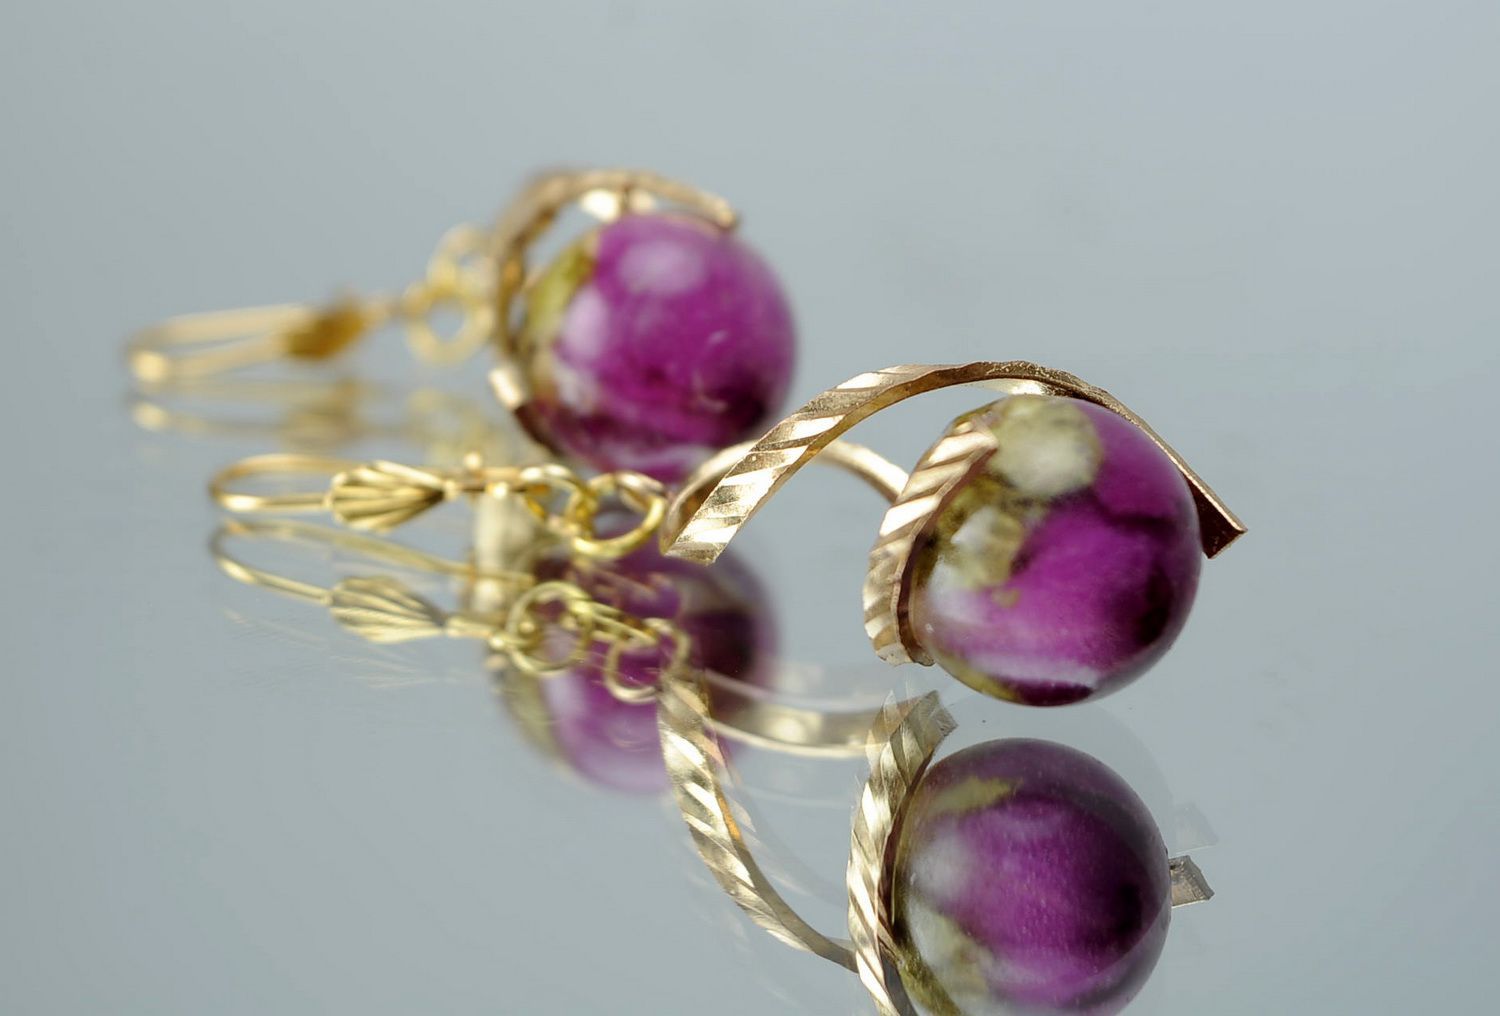 Golden earrings made from rose buds photo 1